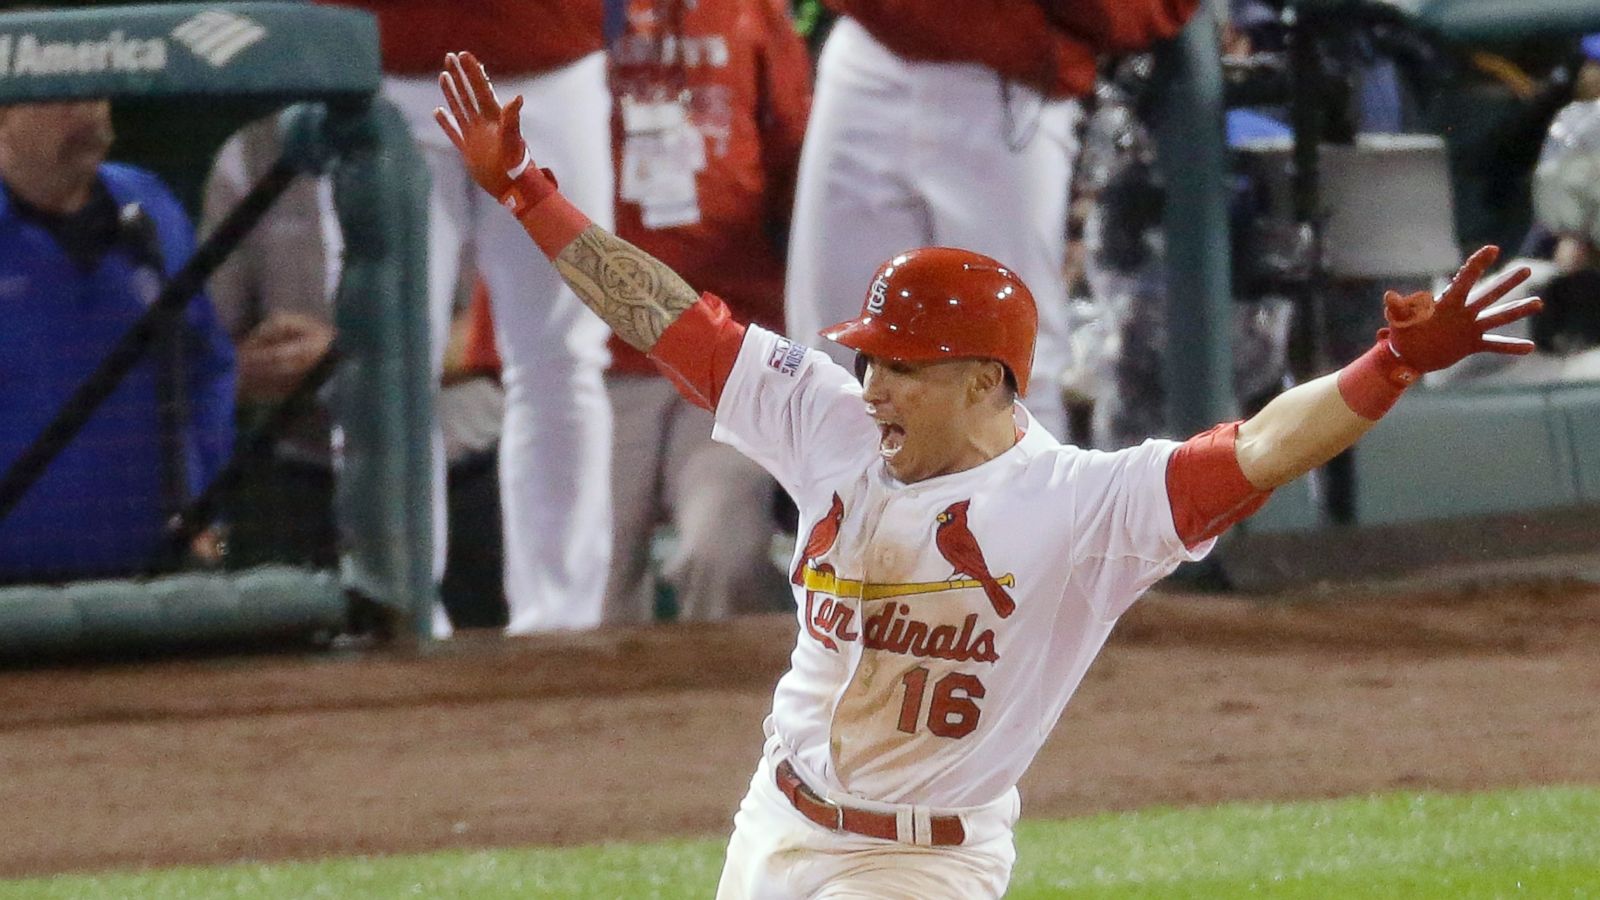 Watch: Kolten Wong makes acrobatic stop, gets runner on falling throw in  Cardinals win 